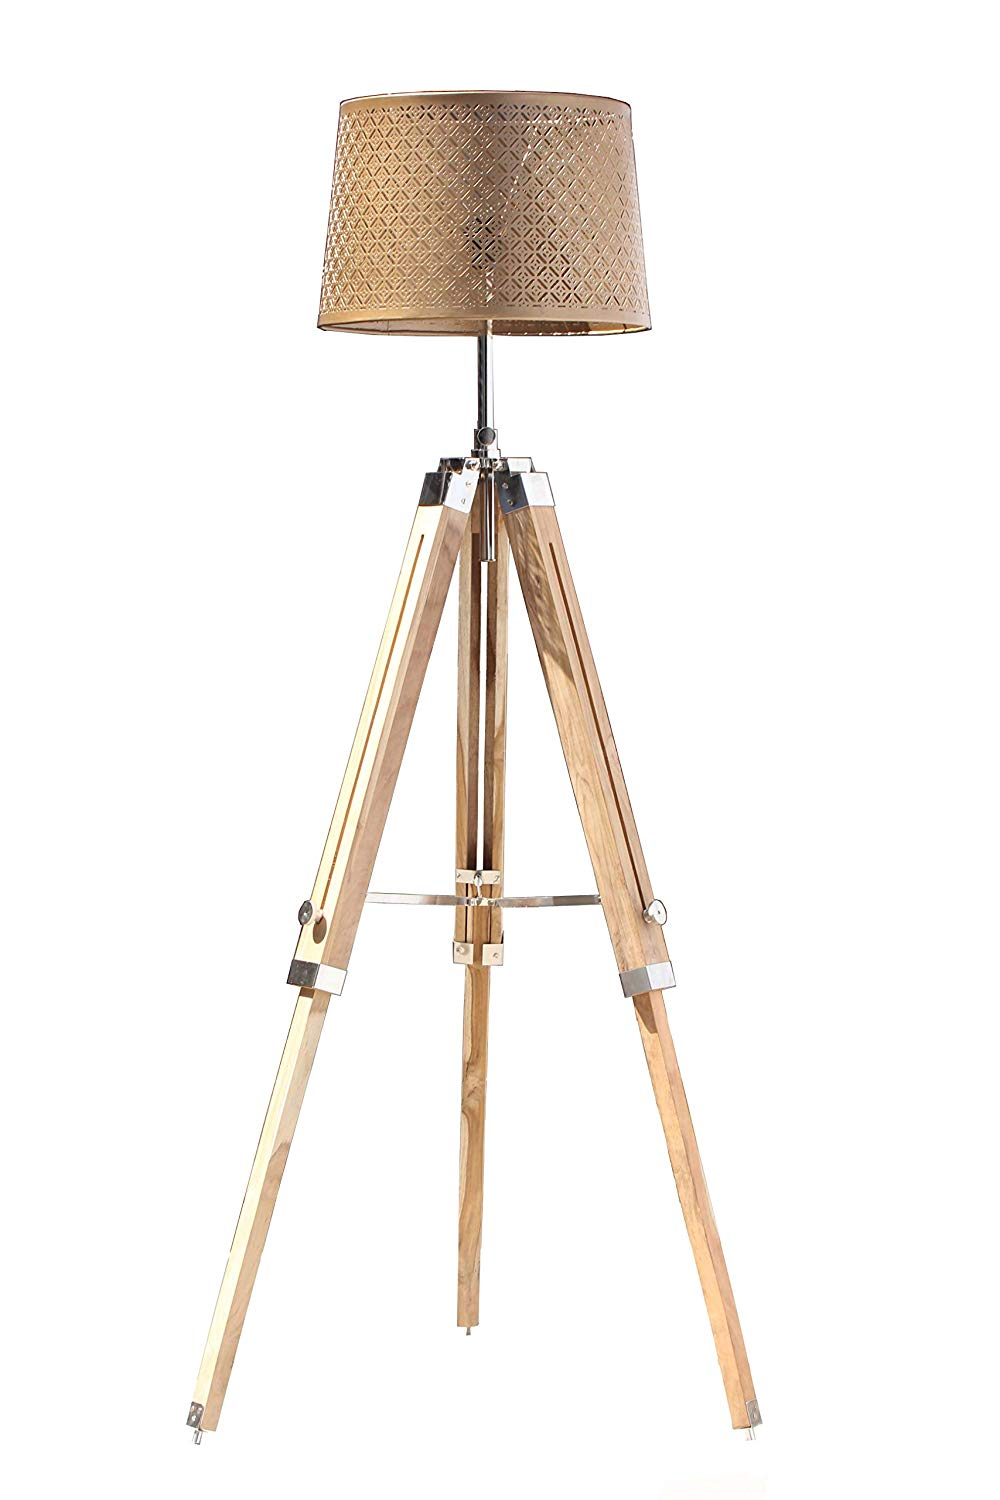 Nautical Teak Wood Floor Lamp Tripod Stand Home Decor throughout proportions 1000 X 1500